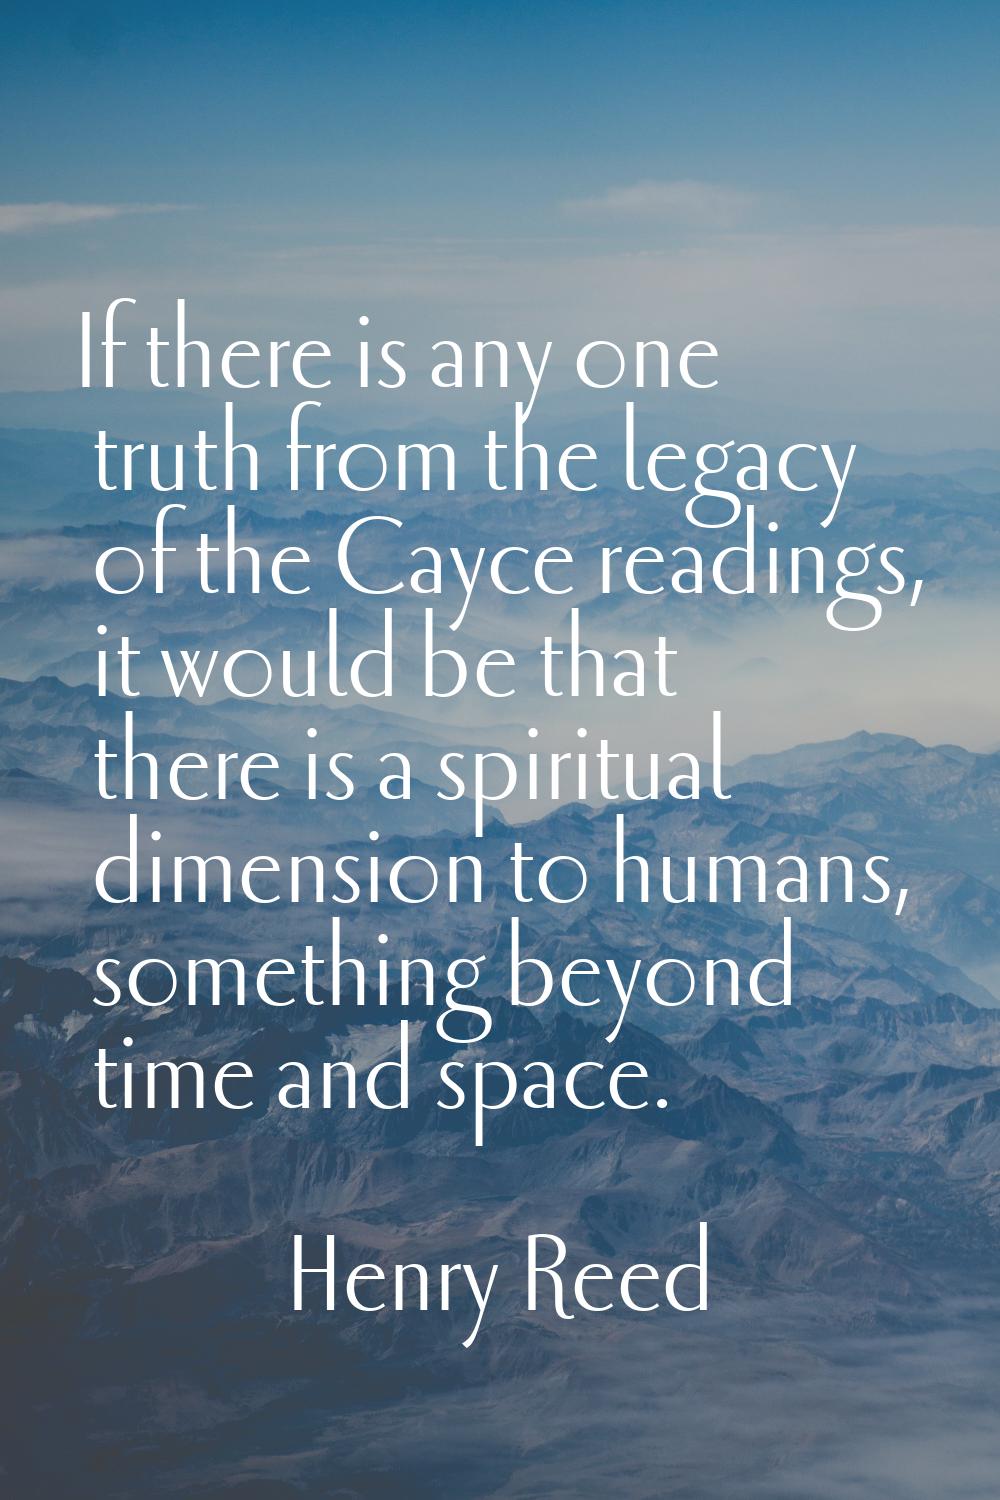 If there is any one truth from the legacy of the Cayce readings, it would be that there is a spirit